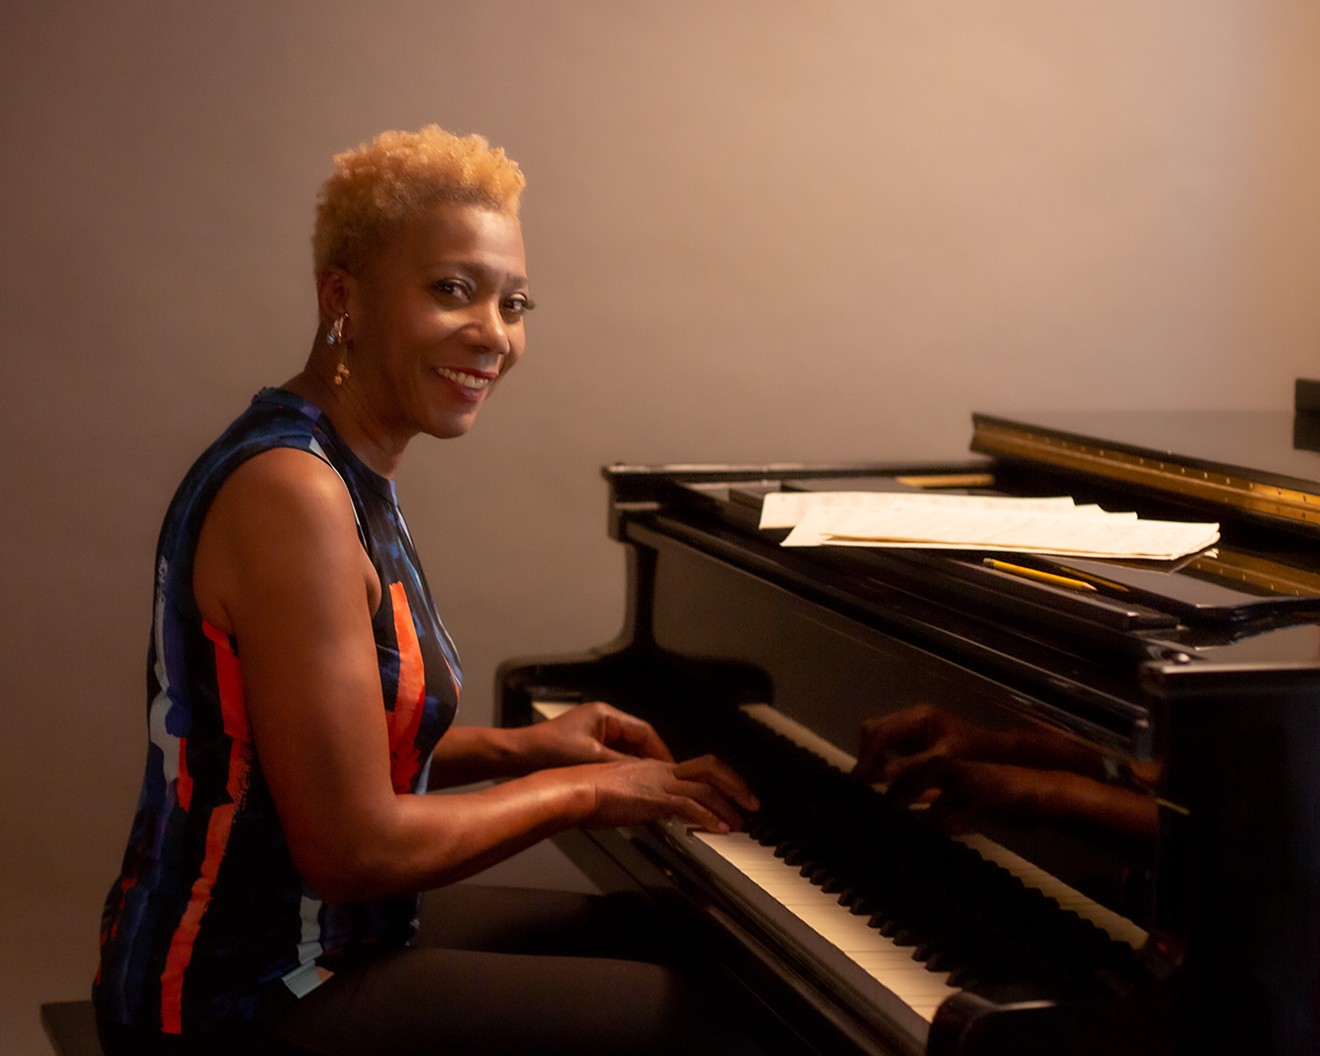 Jazz vocalist-composer Carmen Lundy will sing compositions by Mary Lou Williams as part of the New World Symphony's "The Soundworld of Mary Lou Williams" on Saturday, February 24, and Sunday, February 25.